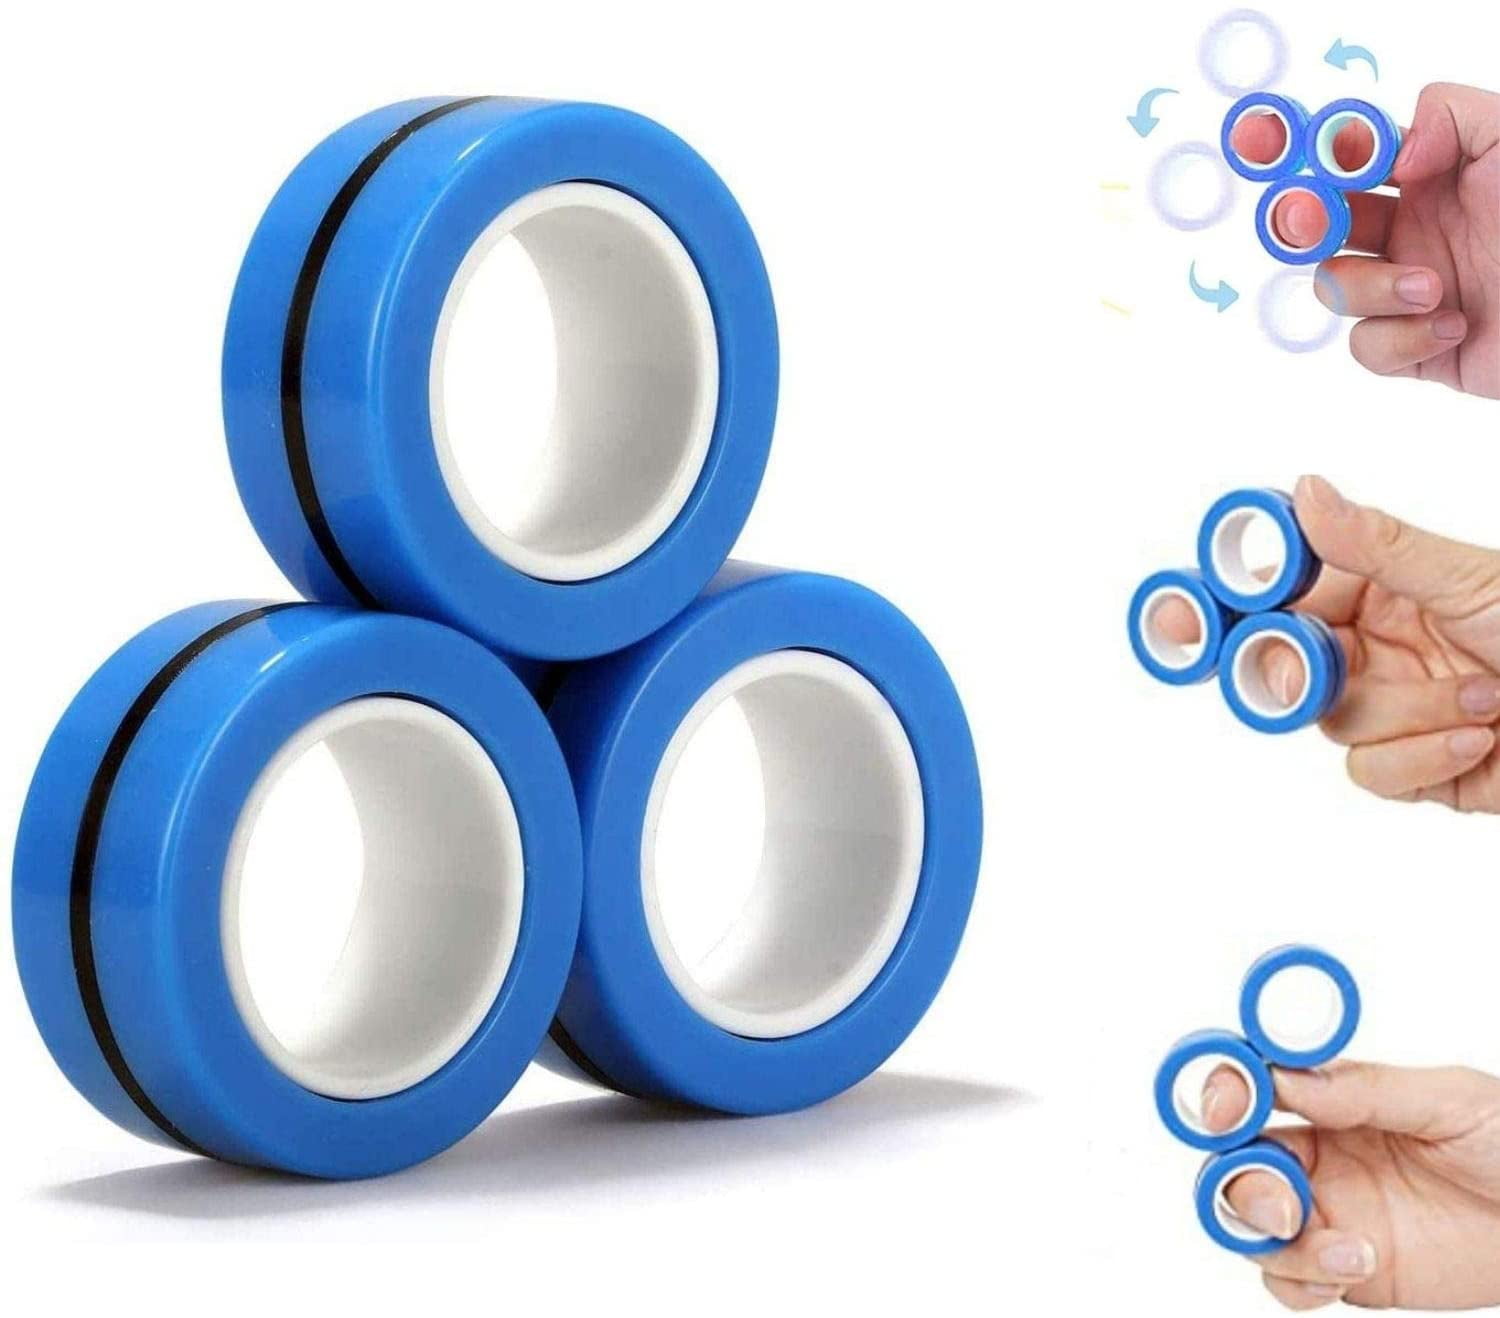 Amazon.com: MBOUTrising 12Pcs Magnetic Ring Fidget Toys Pack, Stress Relief  Fidget Spinner Toys for Training Relieves Reducer Autism Anxiety,  Camouflage Fingers Fidget, Magic Balls, Anti-Stress Ring Balls : Toys &  Games